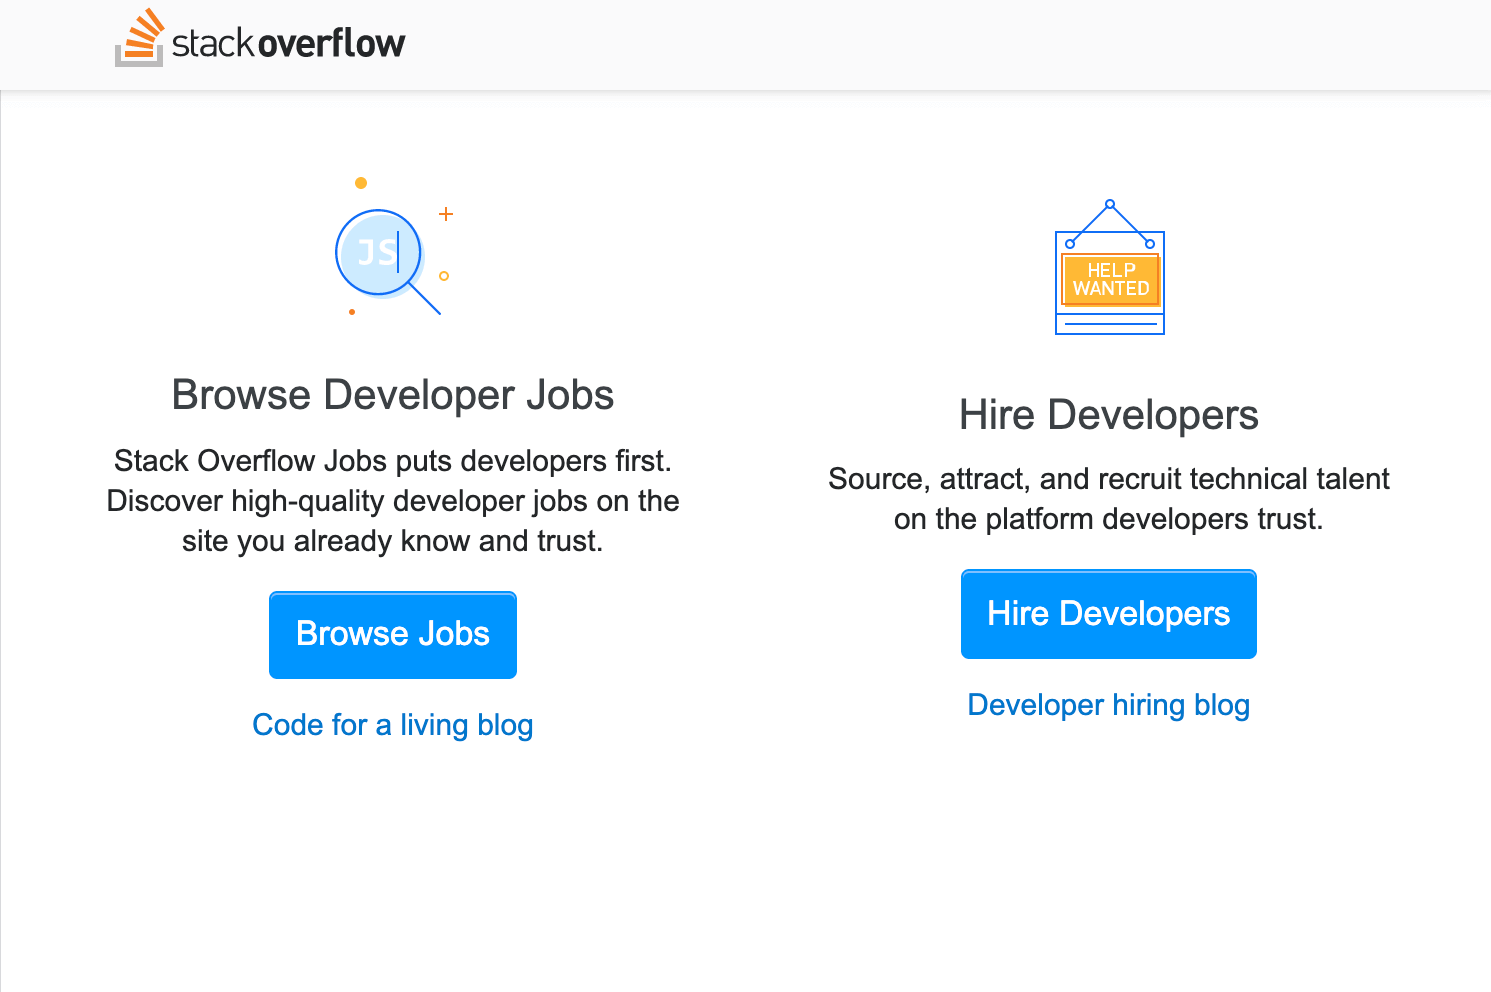 Stack overflow - freelancing jobs site for software developers